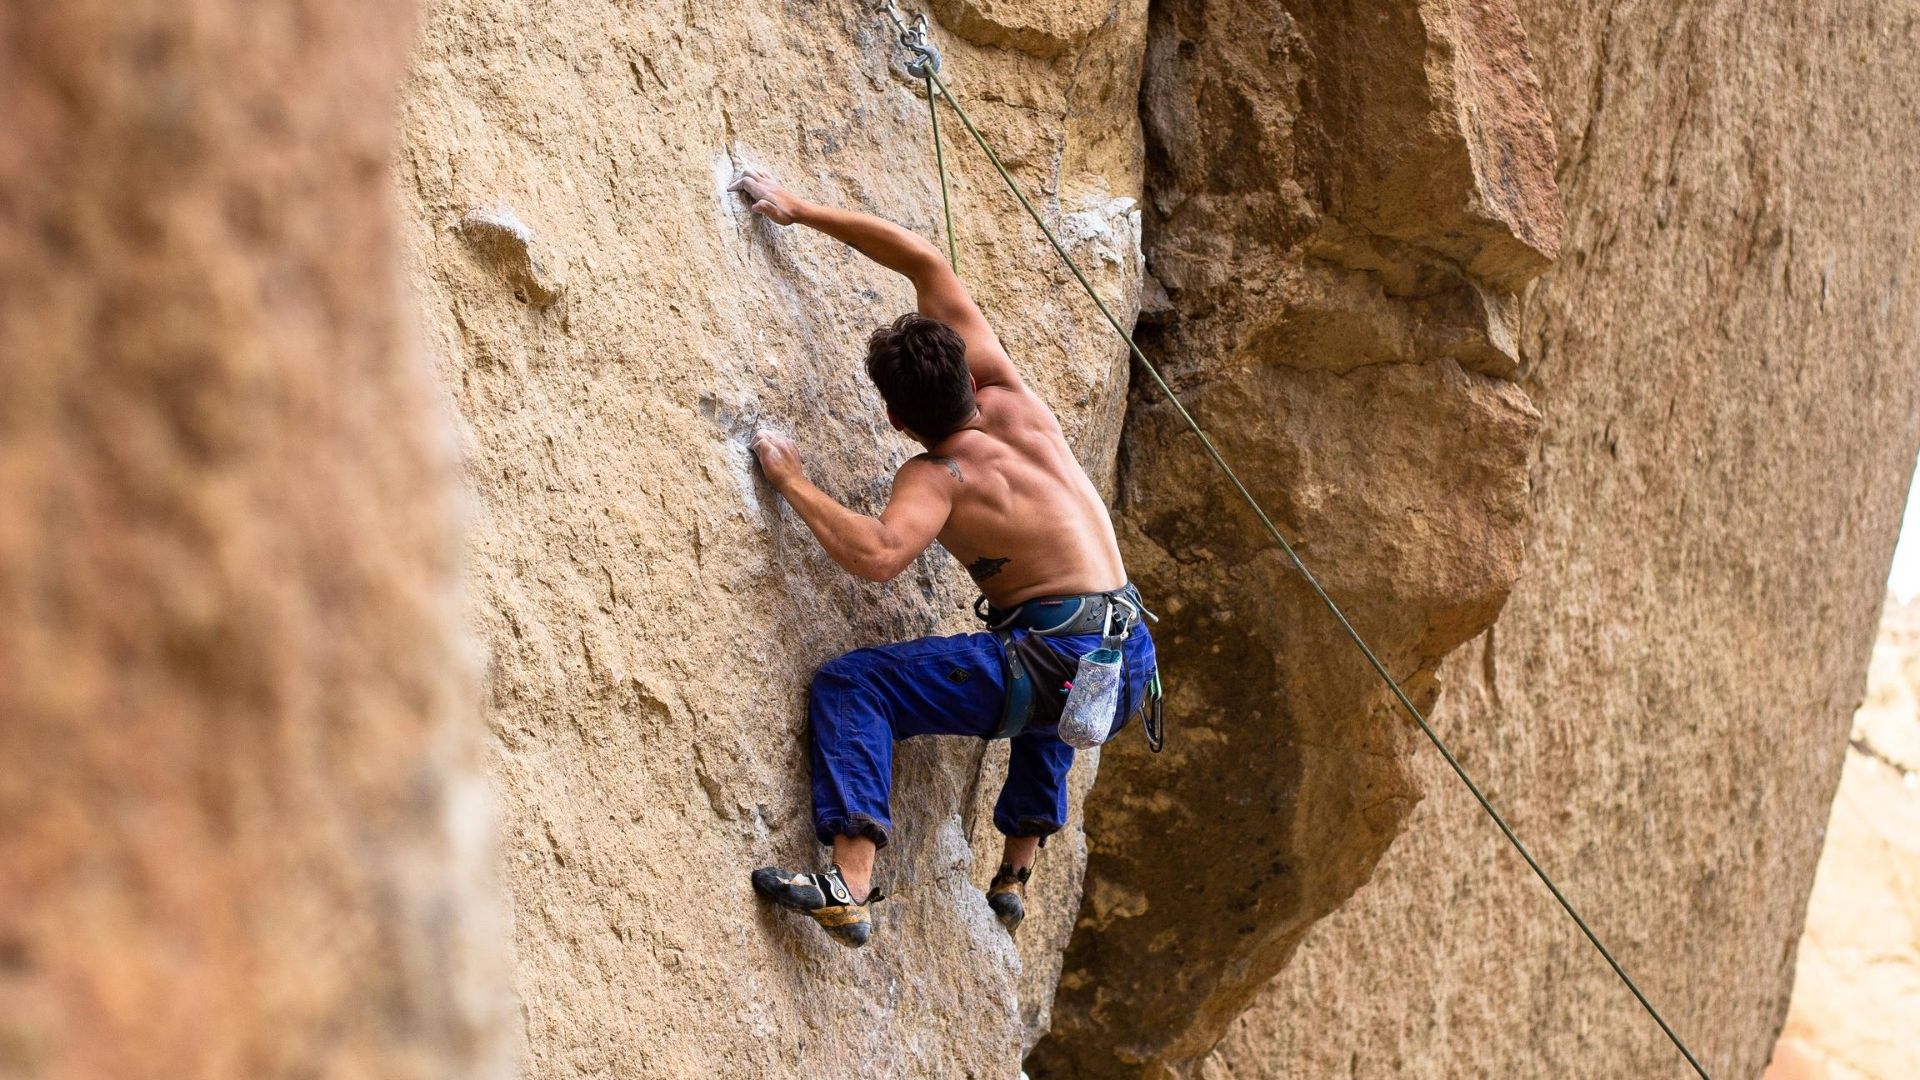 Male rock climber at Smith Rock in Oregon